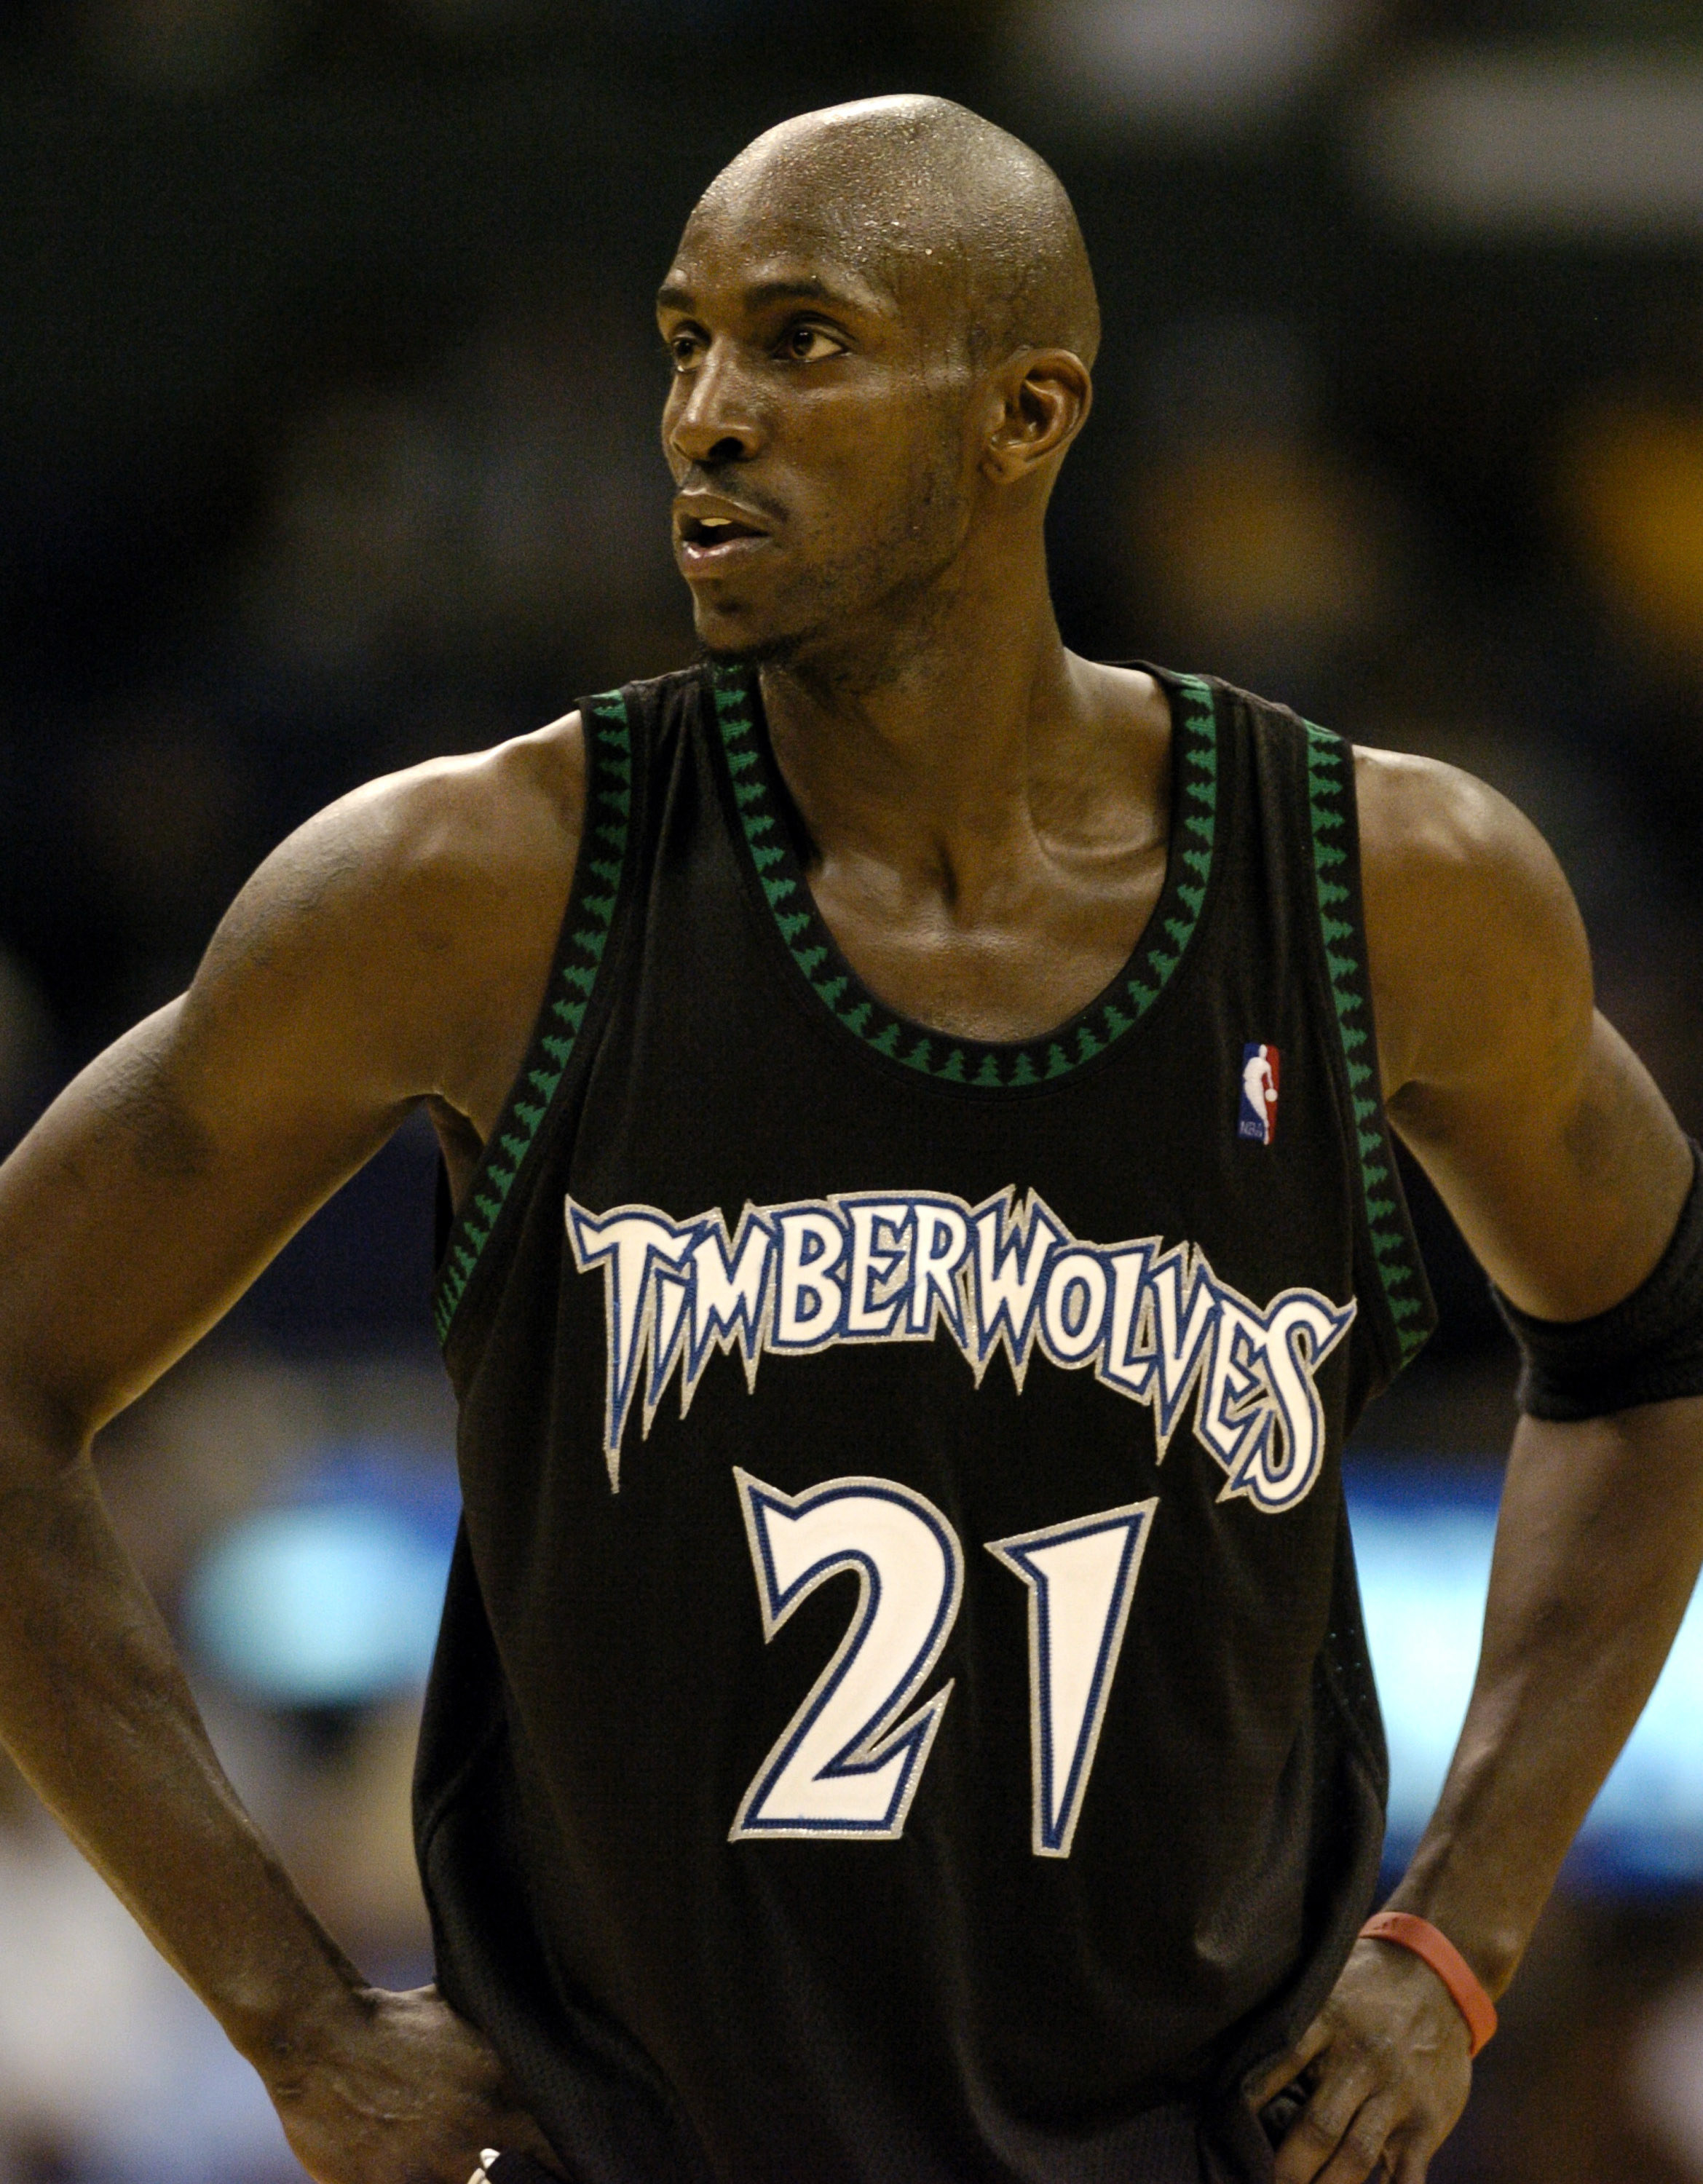 Black Timberwolves jersey with white lettering and green tree outlining